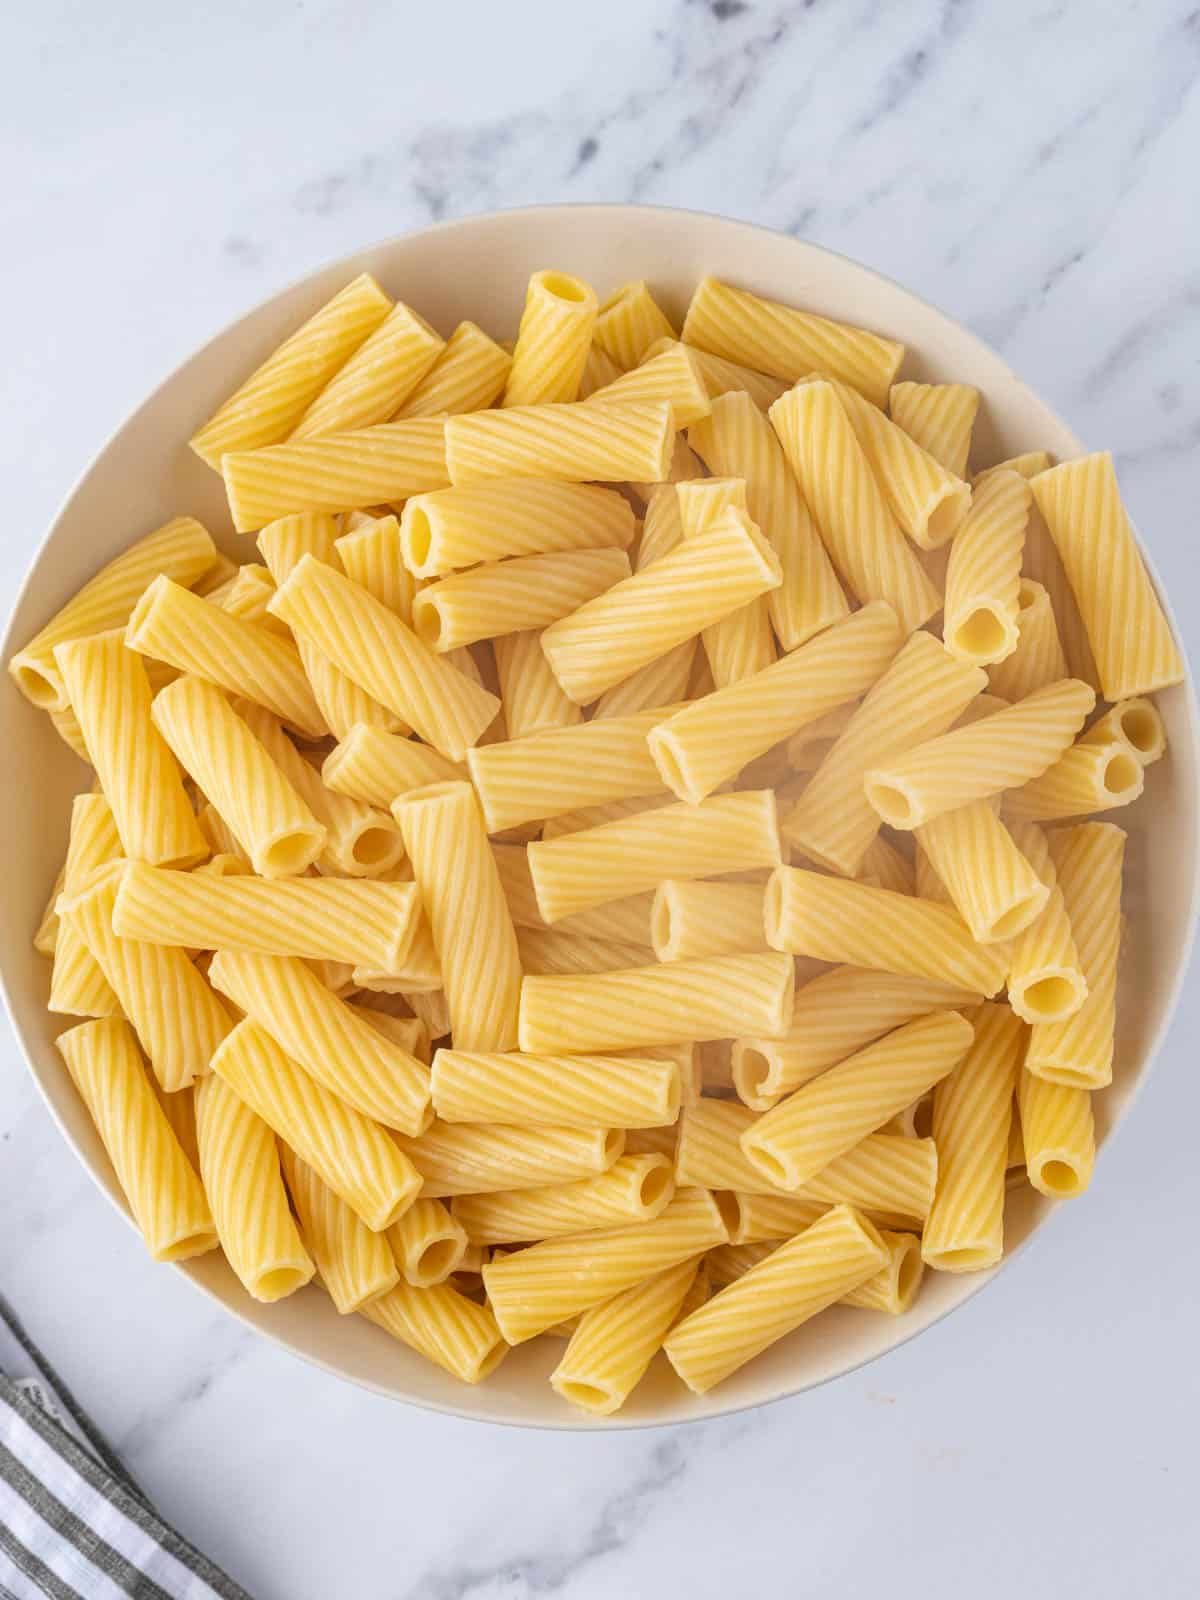 Cooked rigatoni pasta in a bowl.